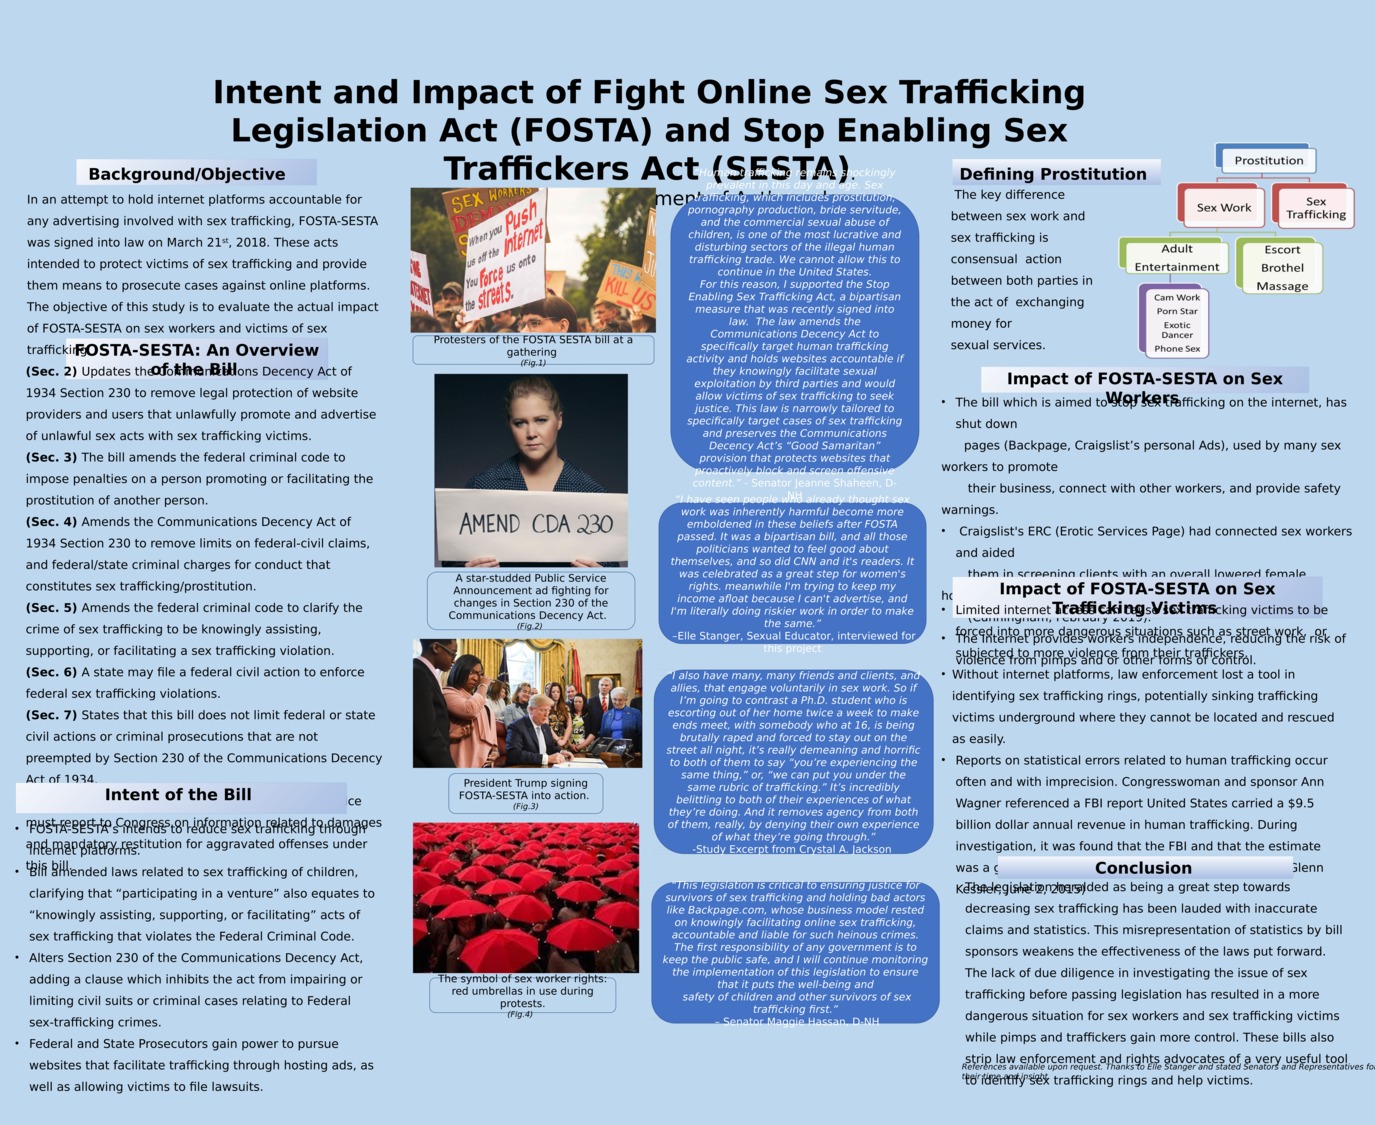 Intent And Impact Of Fight Online Sex Trafficking Legislation Act (Fosta) And Stop Enabling Sex Traffickers Act (Sesta). by kb1217